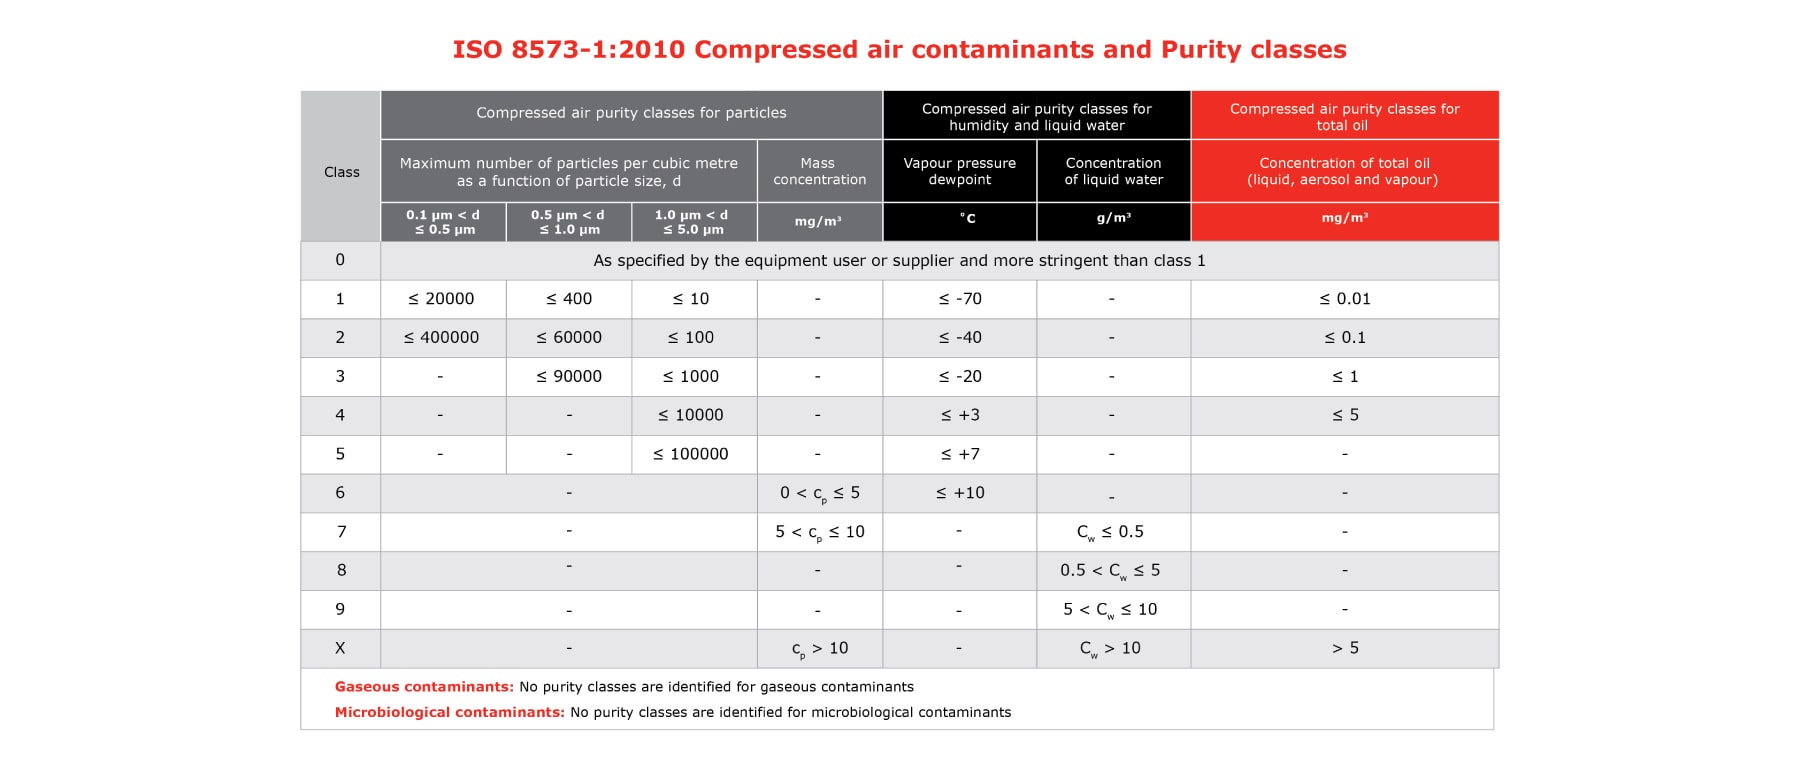 ISO 8573-1:2010, compressed air contaminants like particles